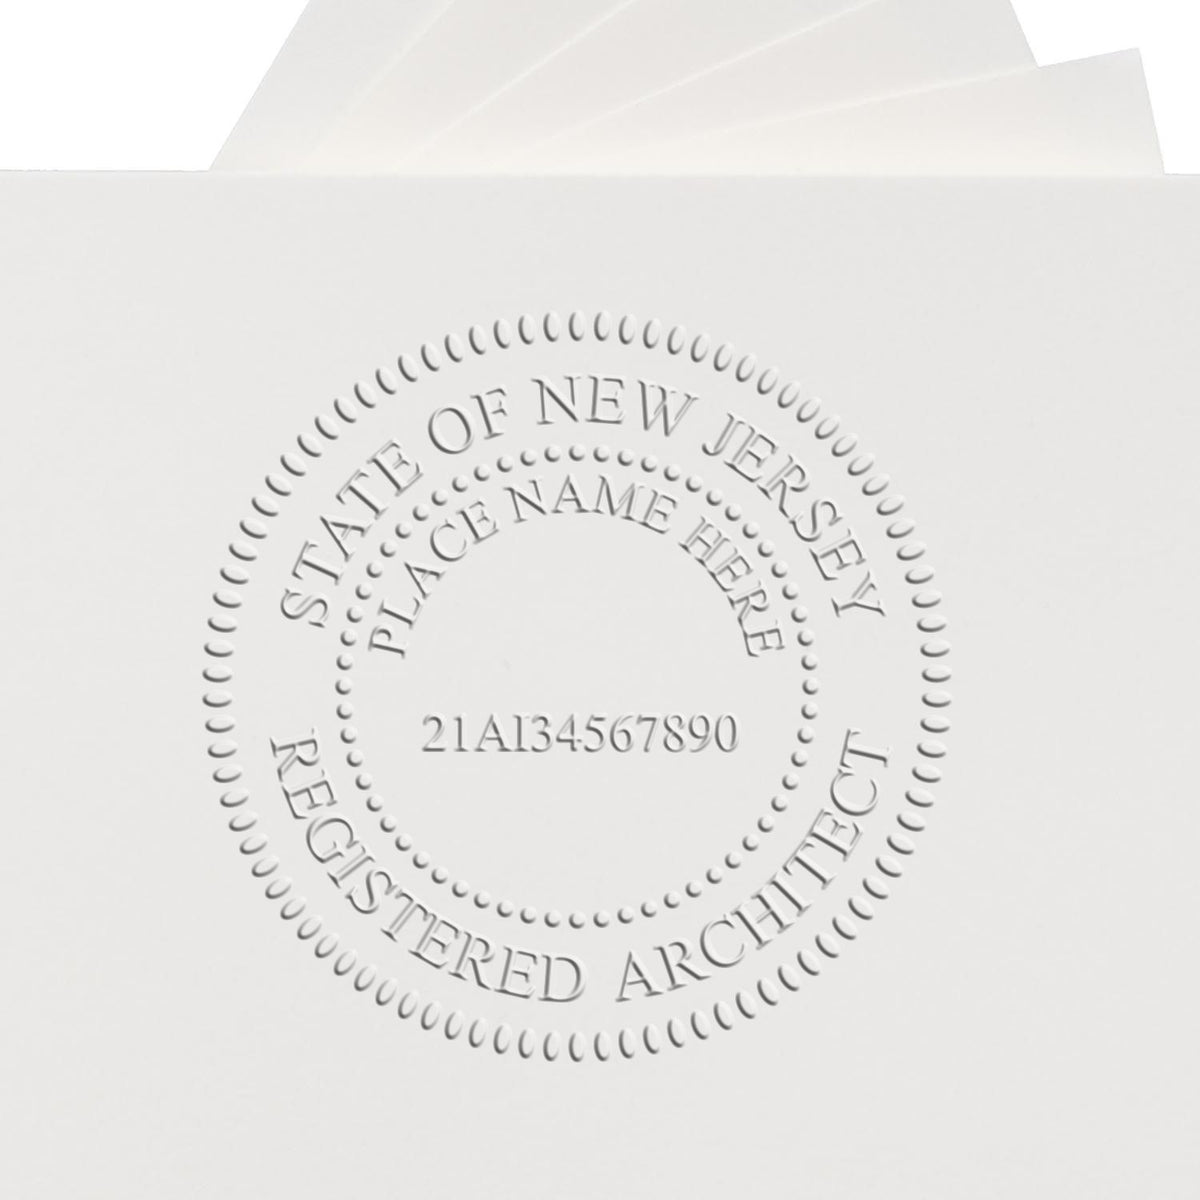 The State of New Jersey Long Reach Architectural Embossing Seal stamp impression comes to life with a crisp, detailed photo on paper - showcasing true professional quality.